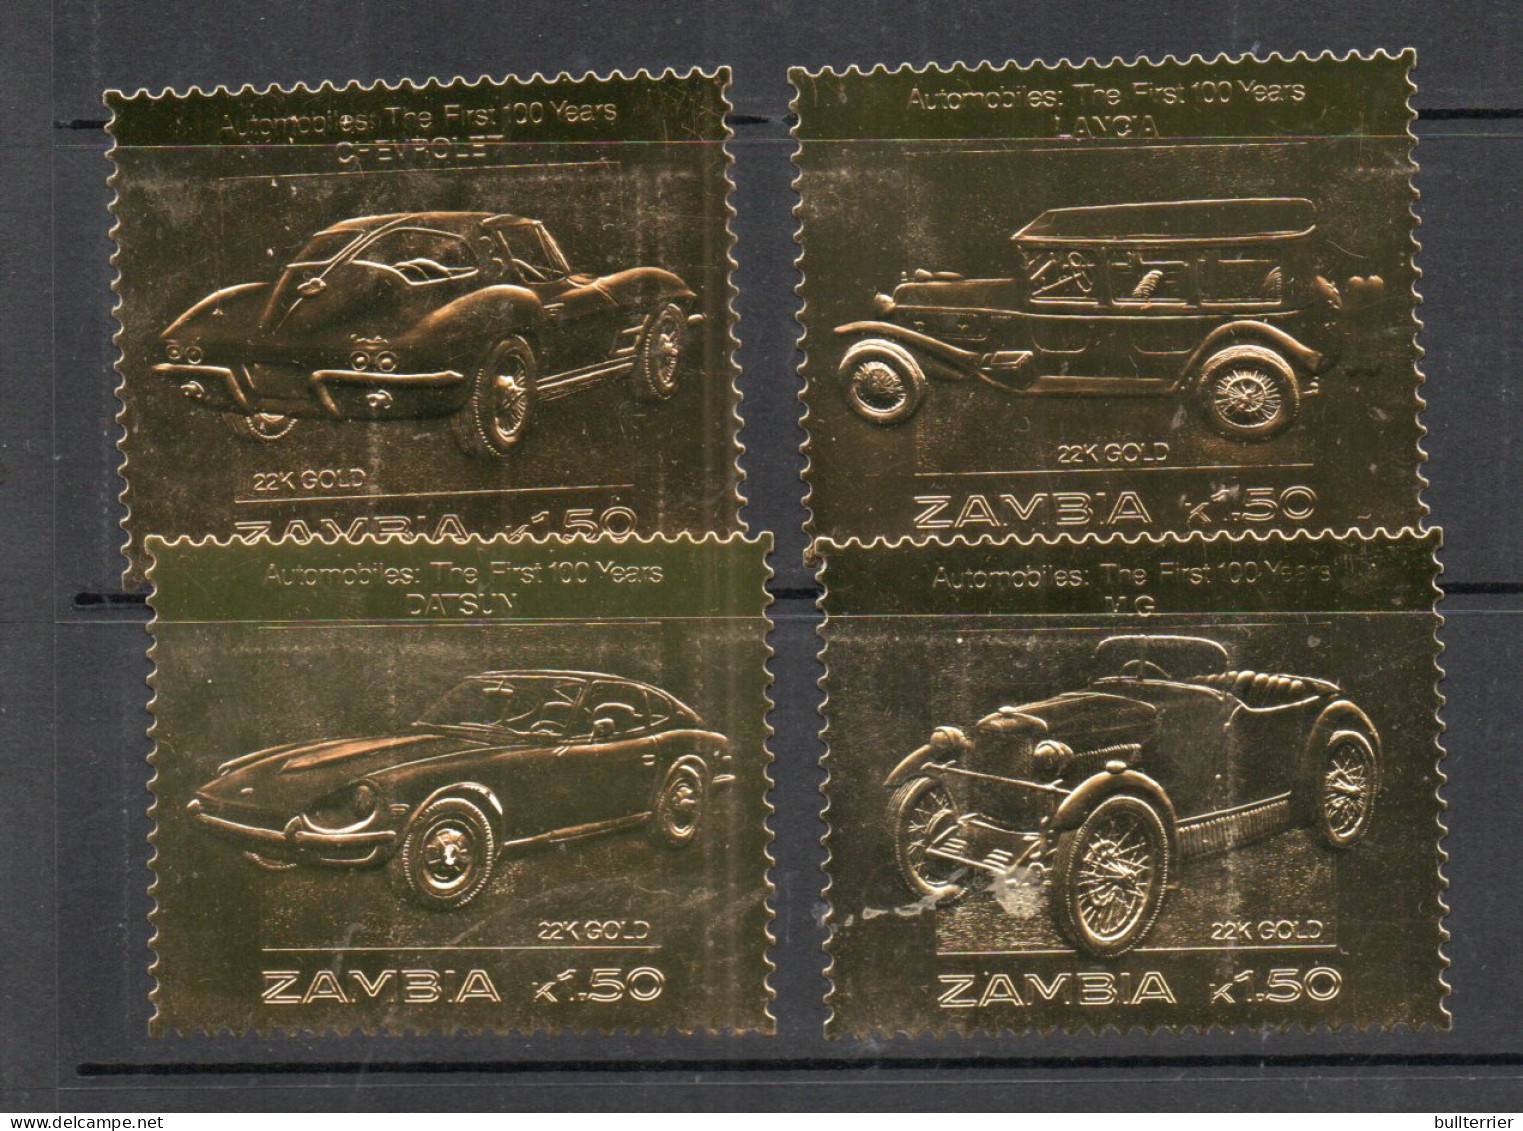 ZAMBIA - 1987 - CLASSIC CARS SET OF 4 GOLD  FOIL EMBOSSED  MINT NEVER HINGED  - Duiven En Duifachtigen